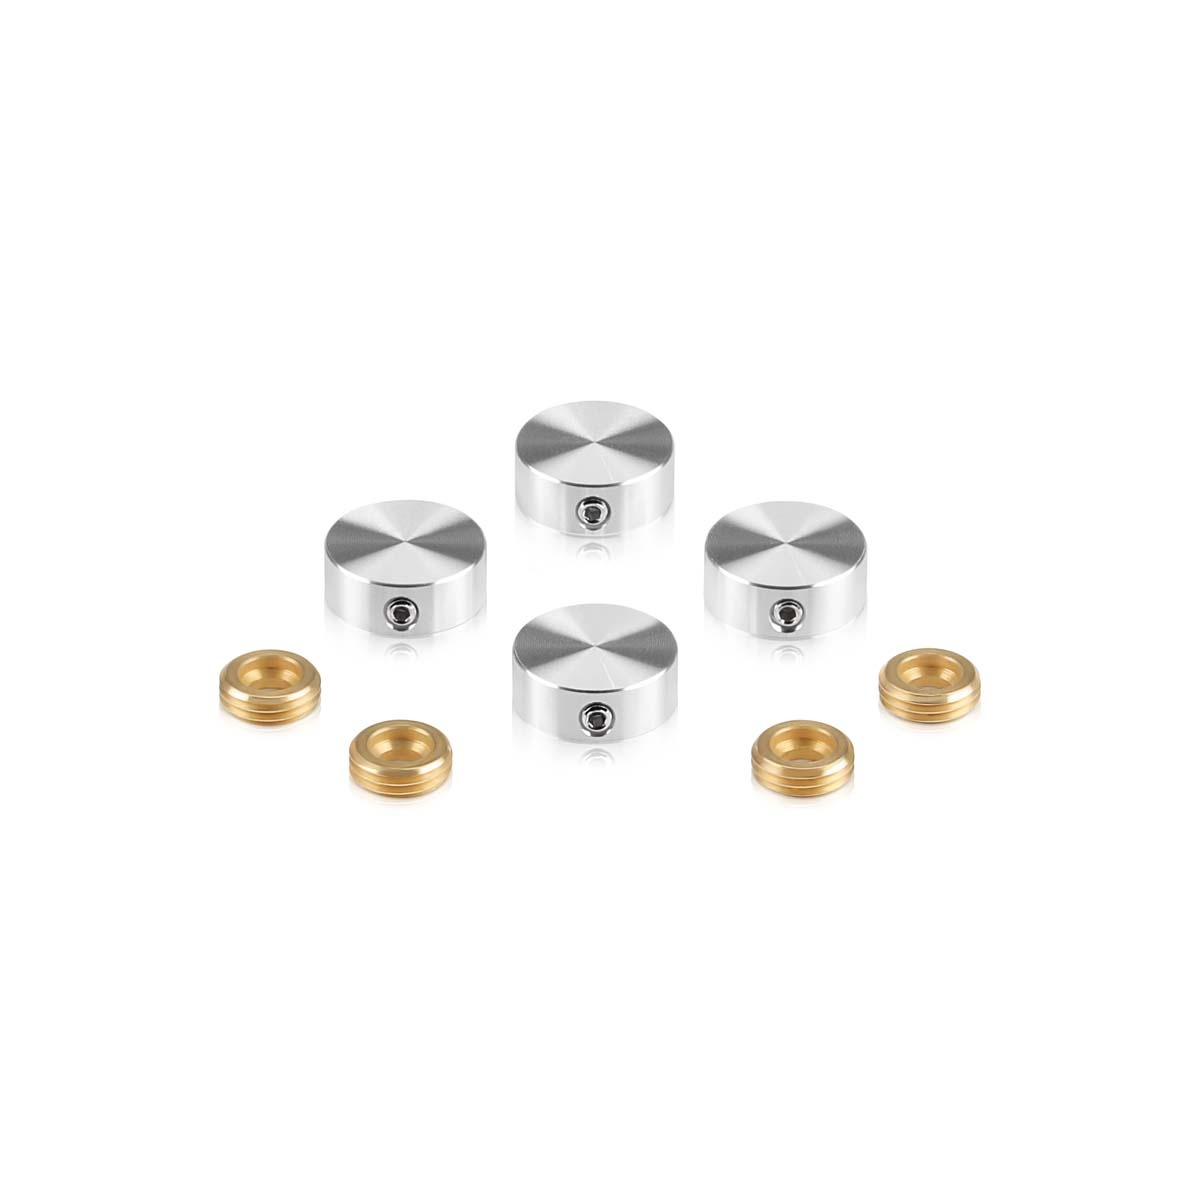 Set of 4 Locking Screw Cover, Diameter: 5/8'', Aluminum Clear Shiny Anodized Finish, (Indoor or Outdoor Use)